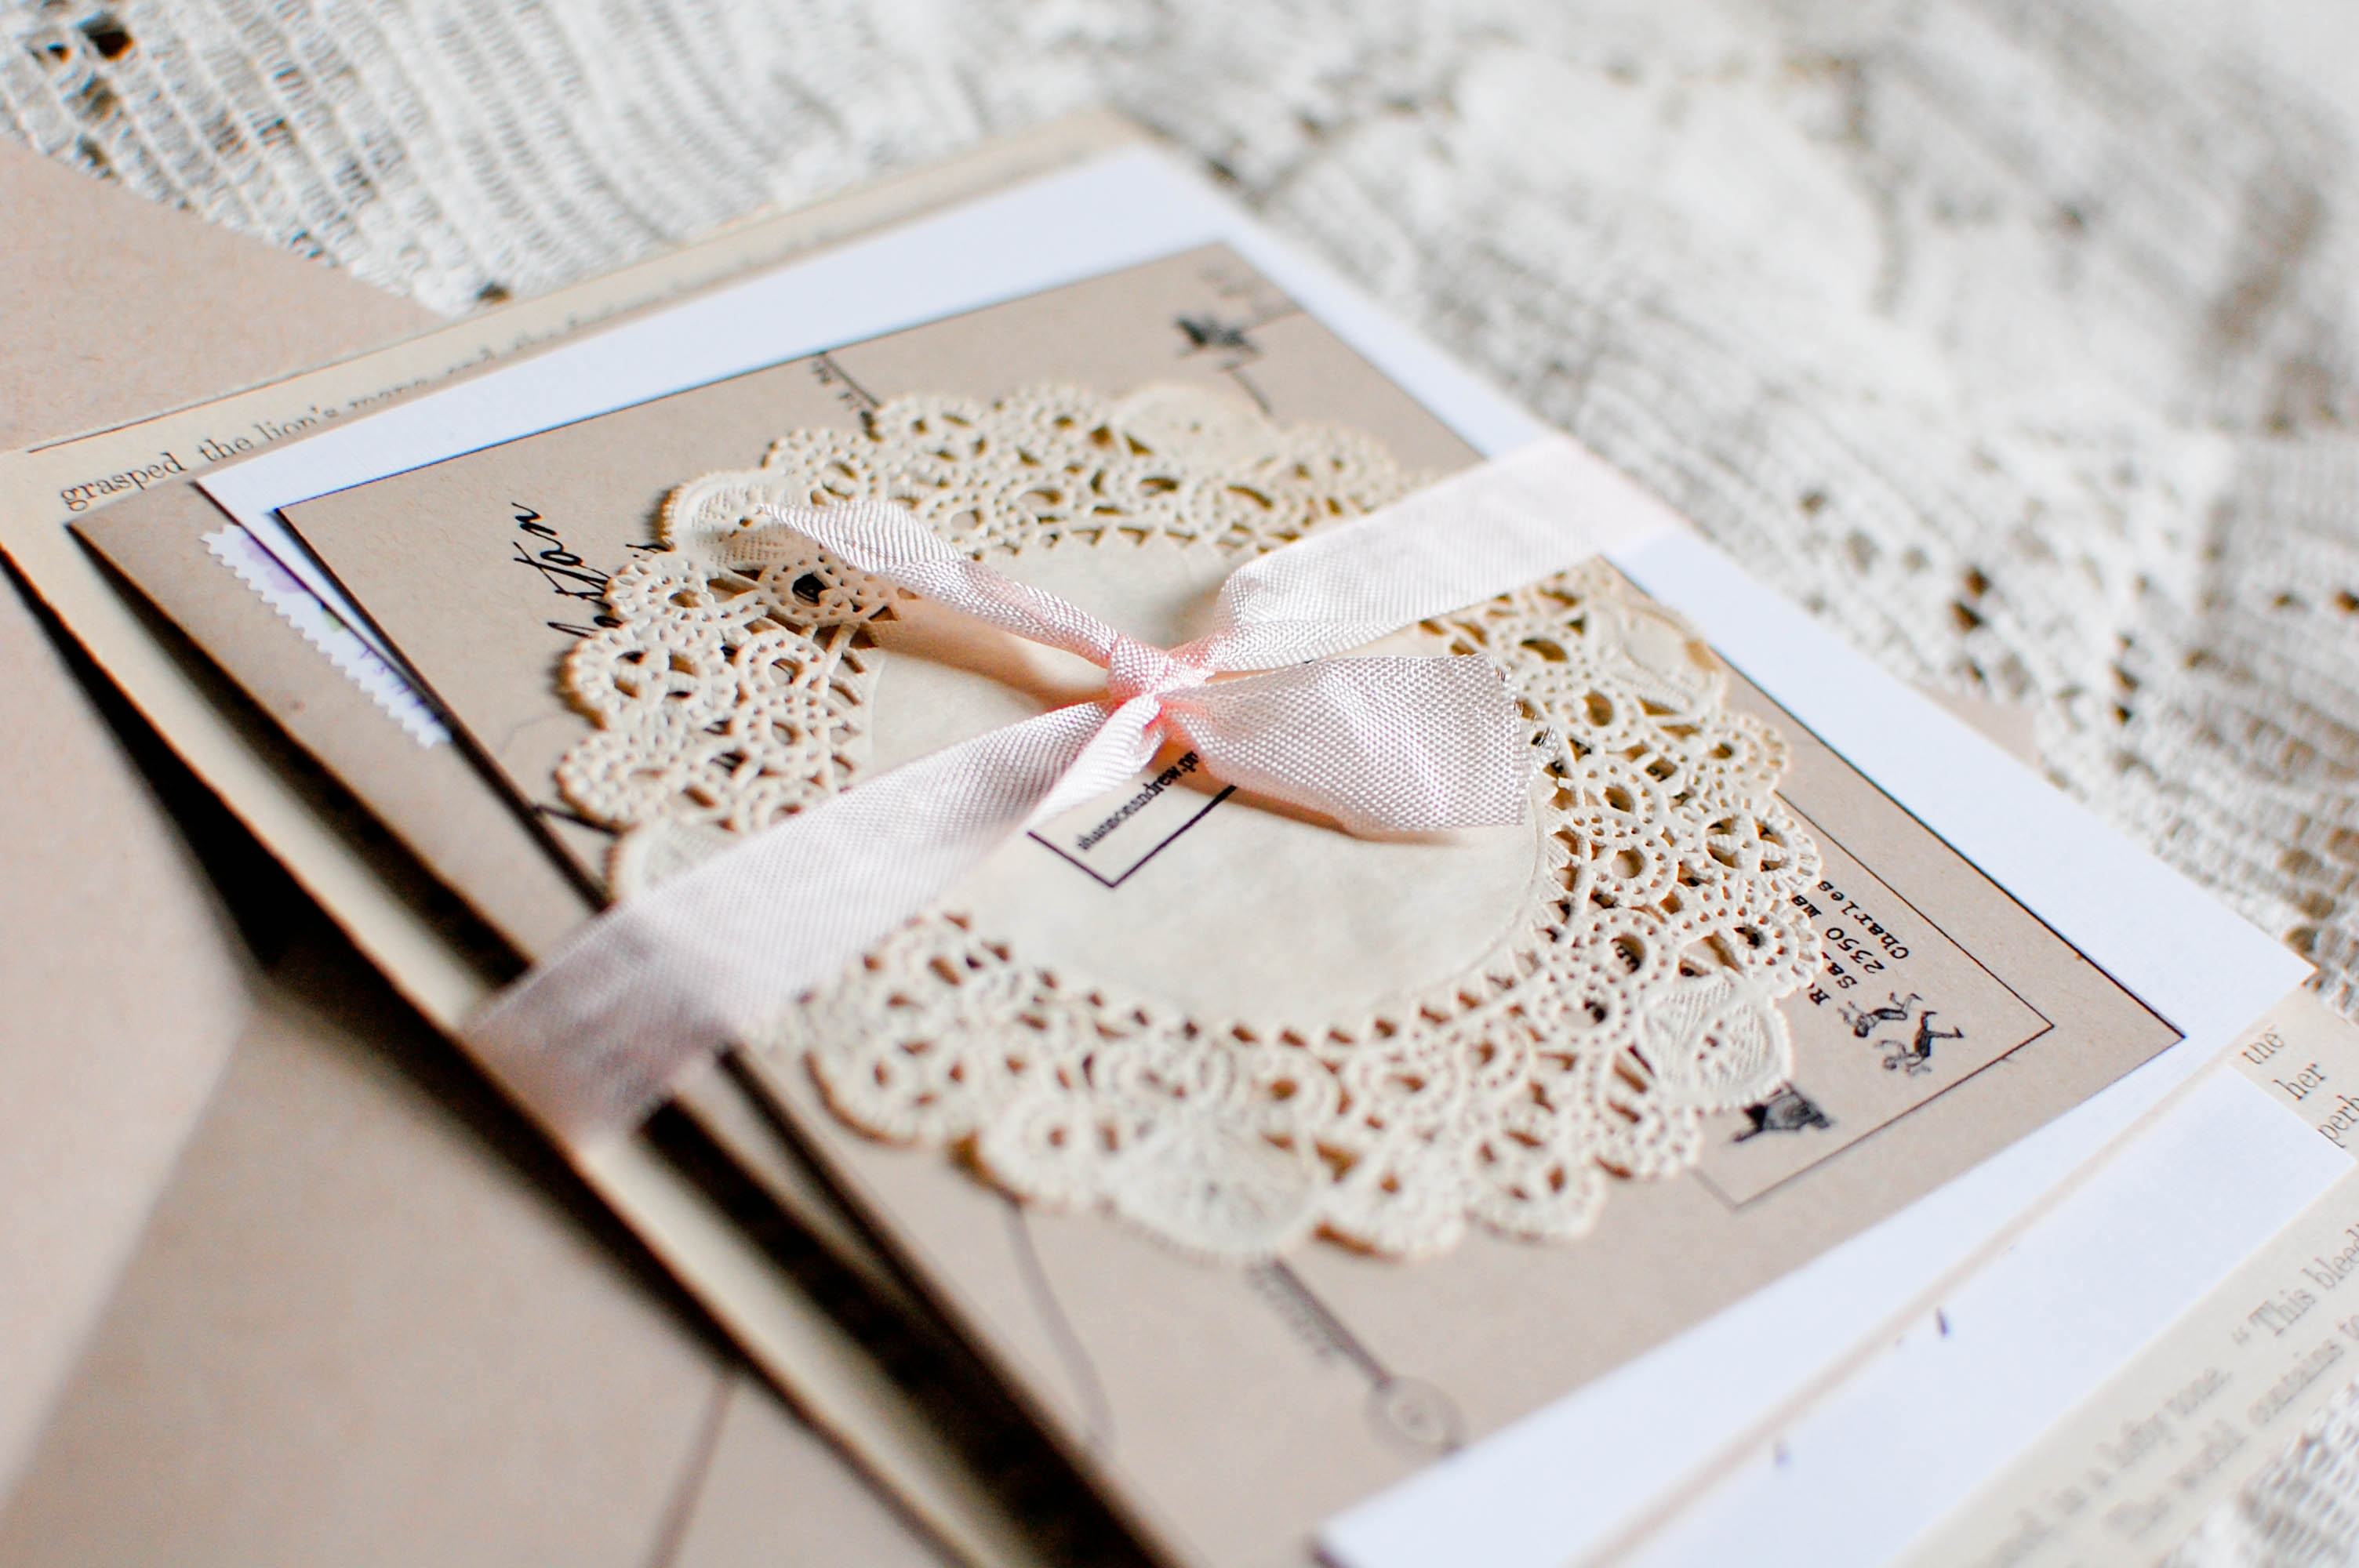 Country Chic Wedding Invitations Tuesday Paper Diy Rustic Chic Wedding Invitations Loverly